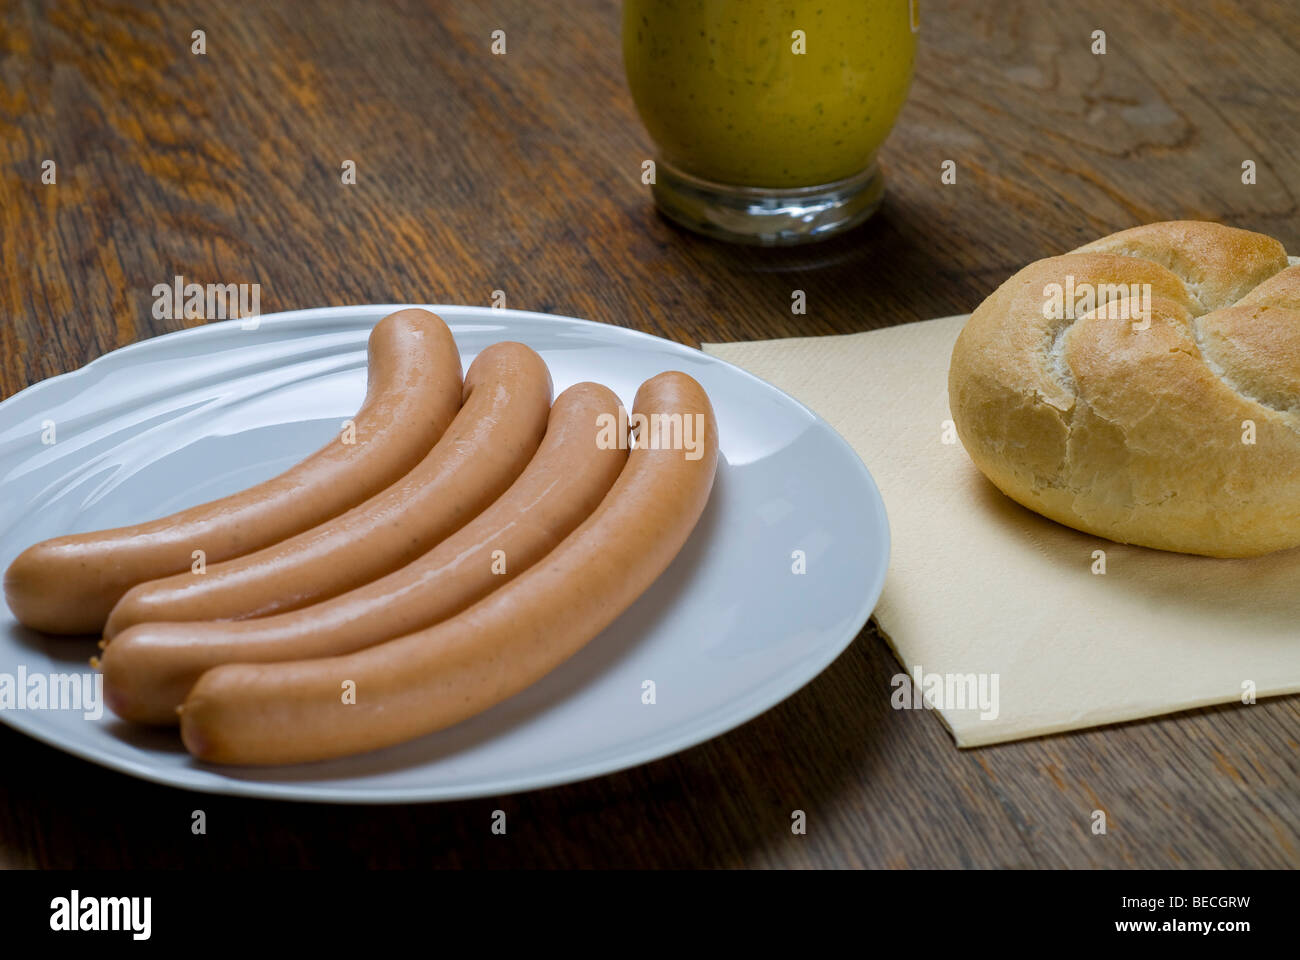 Wiener sausages with Semmel roll and a glass of spice mustard Stock Photo